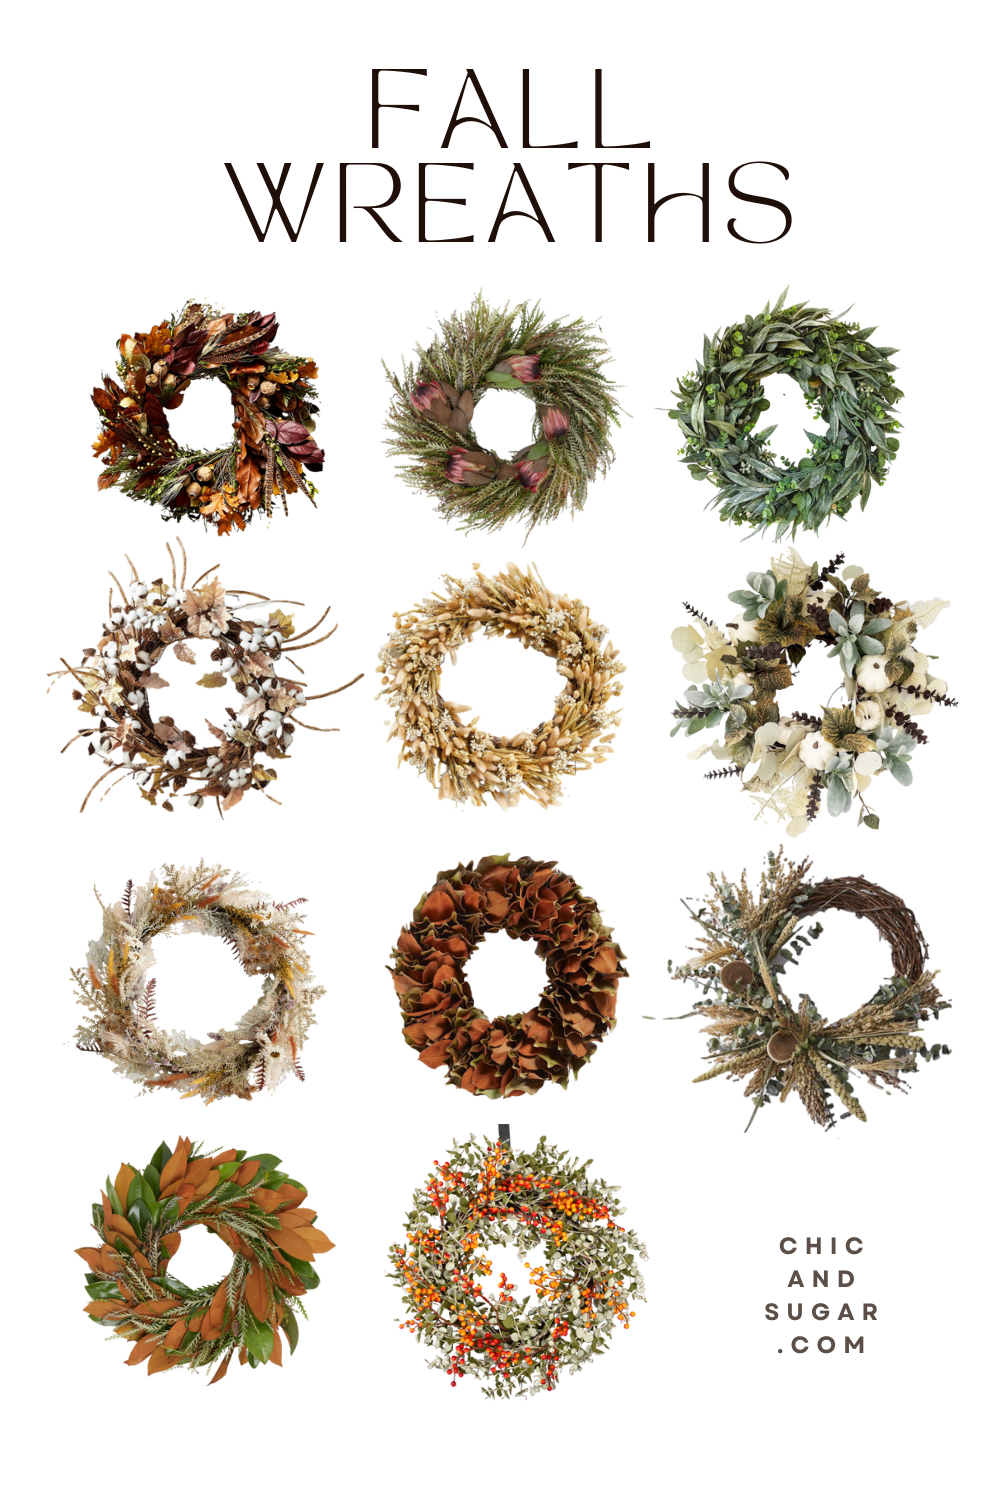 Fall wreath options for a front door